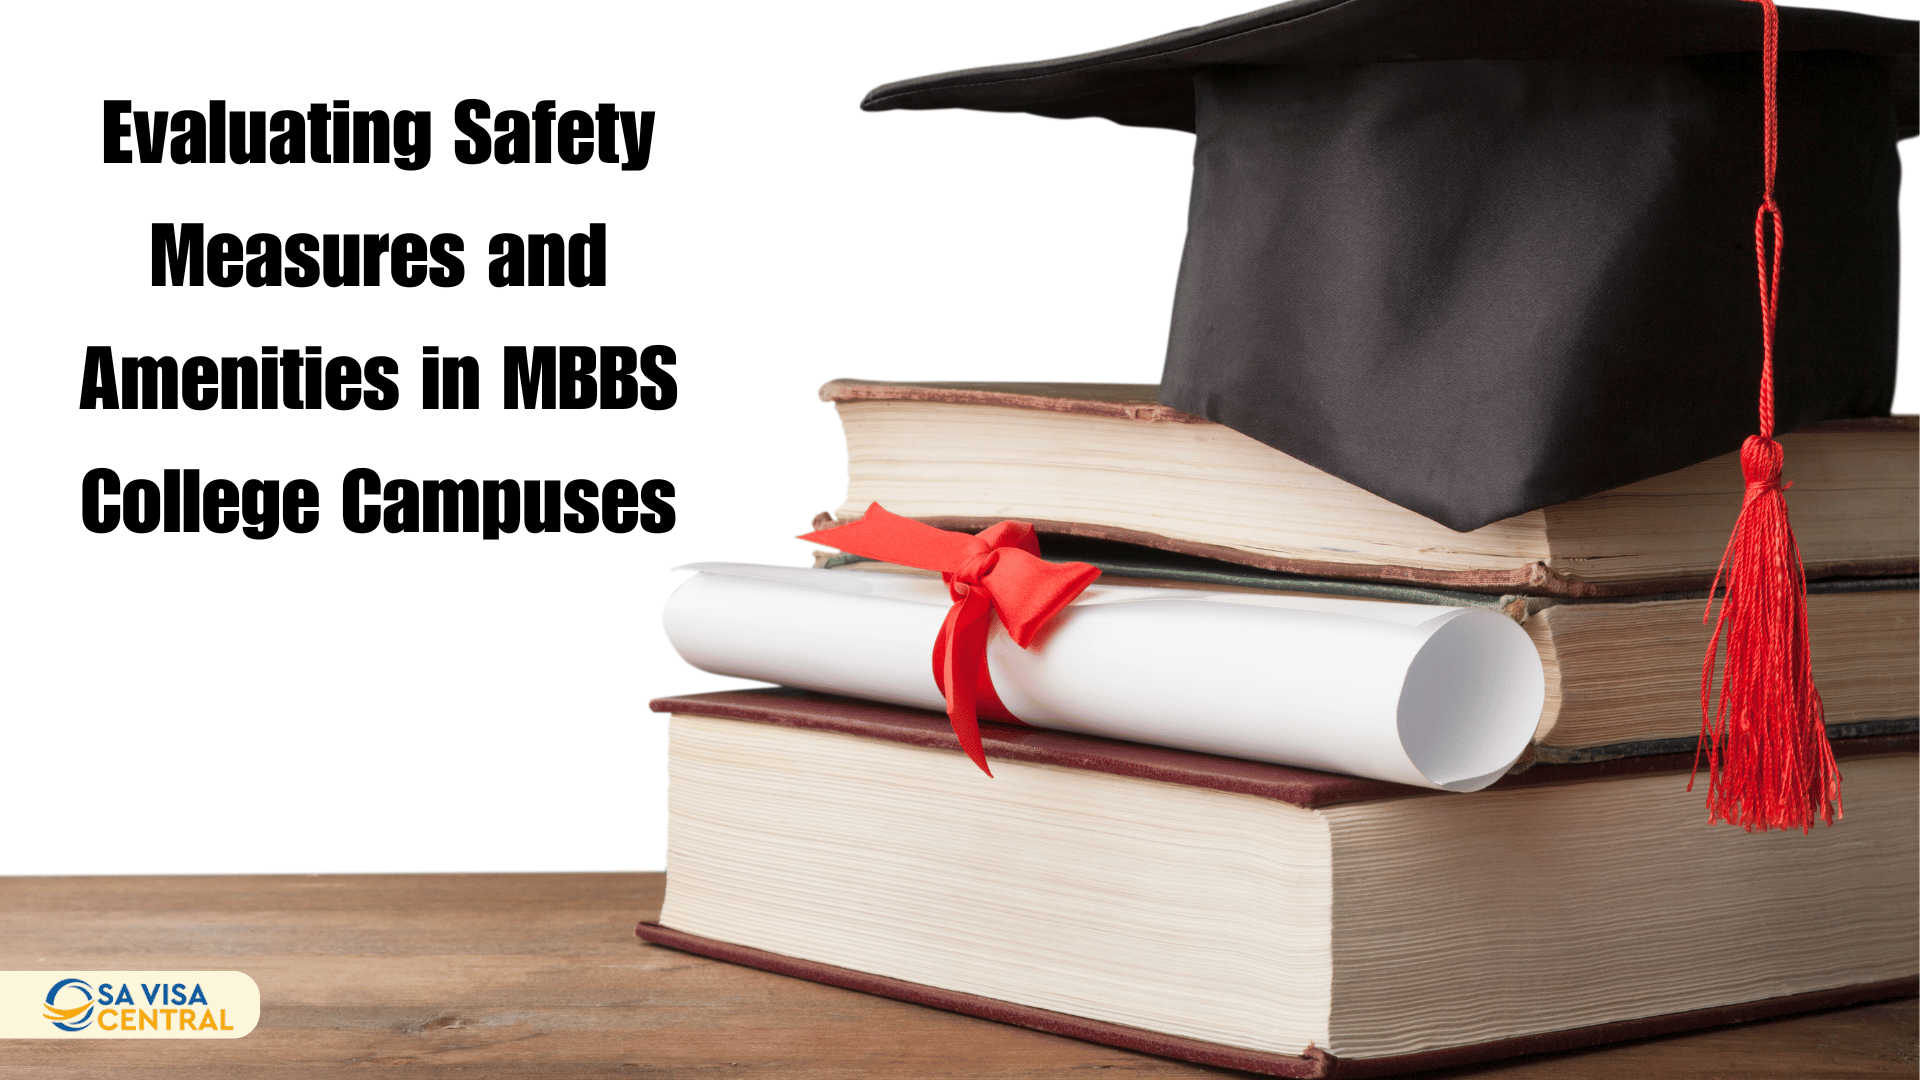 Evaluating Safety Measures and Amenities in MBBS College Campuses